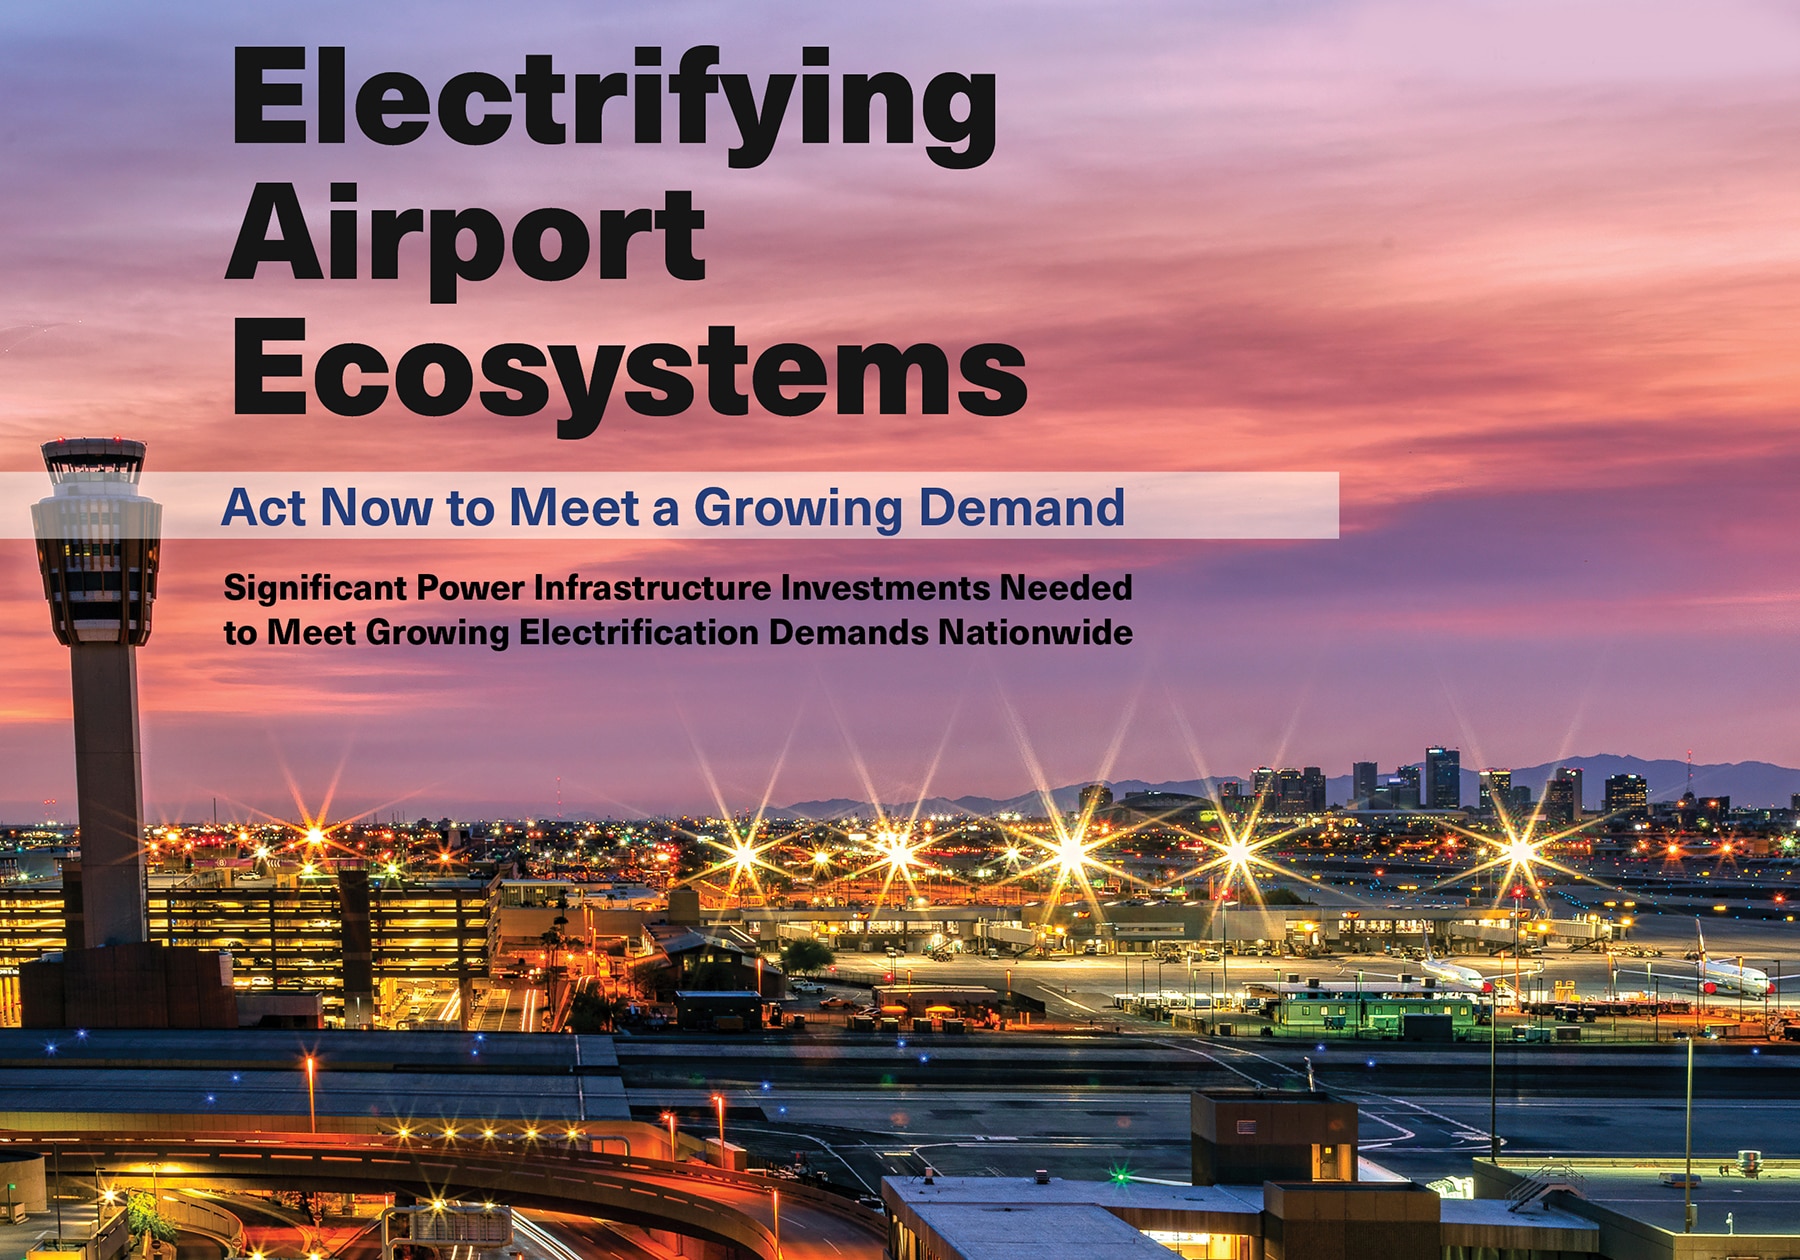 Electrifying Airport Ecosystems by 2050 Could Require Nearly Five Times the Electric Power Currently Used